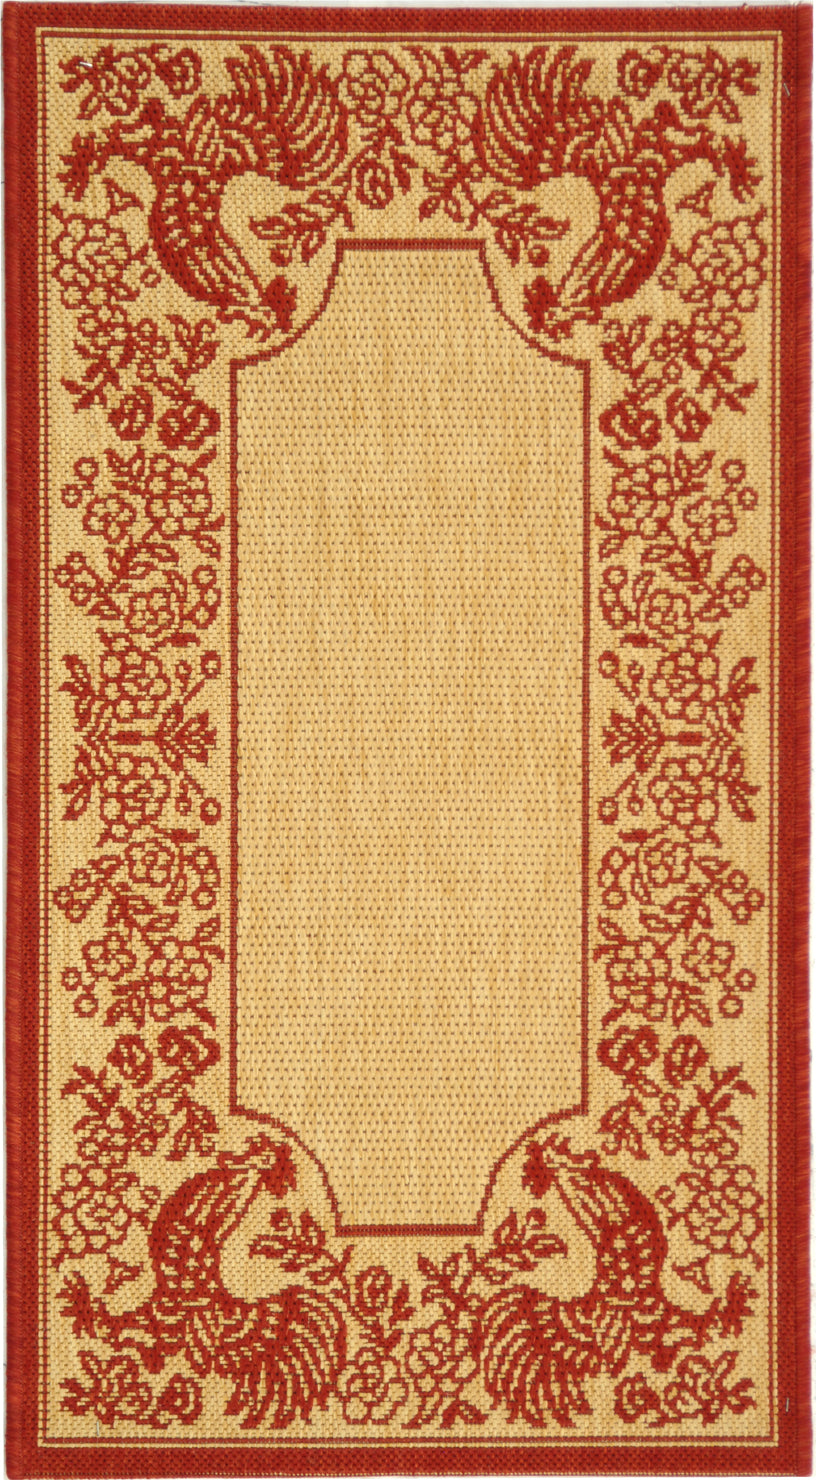 Safavieh Courtyard CY3305 Natural/Red Area Rug main image